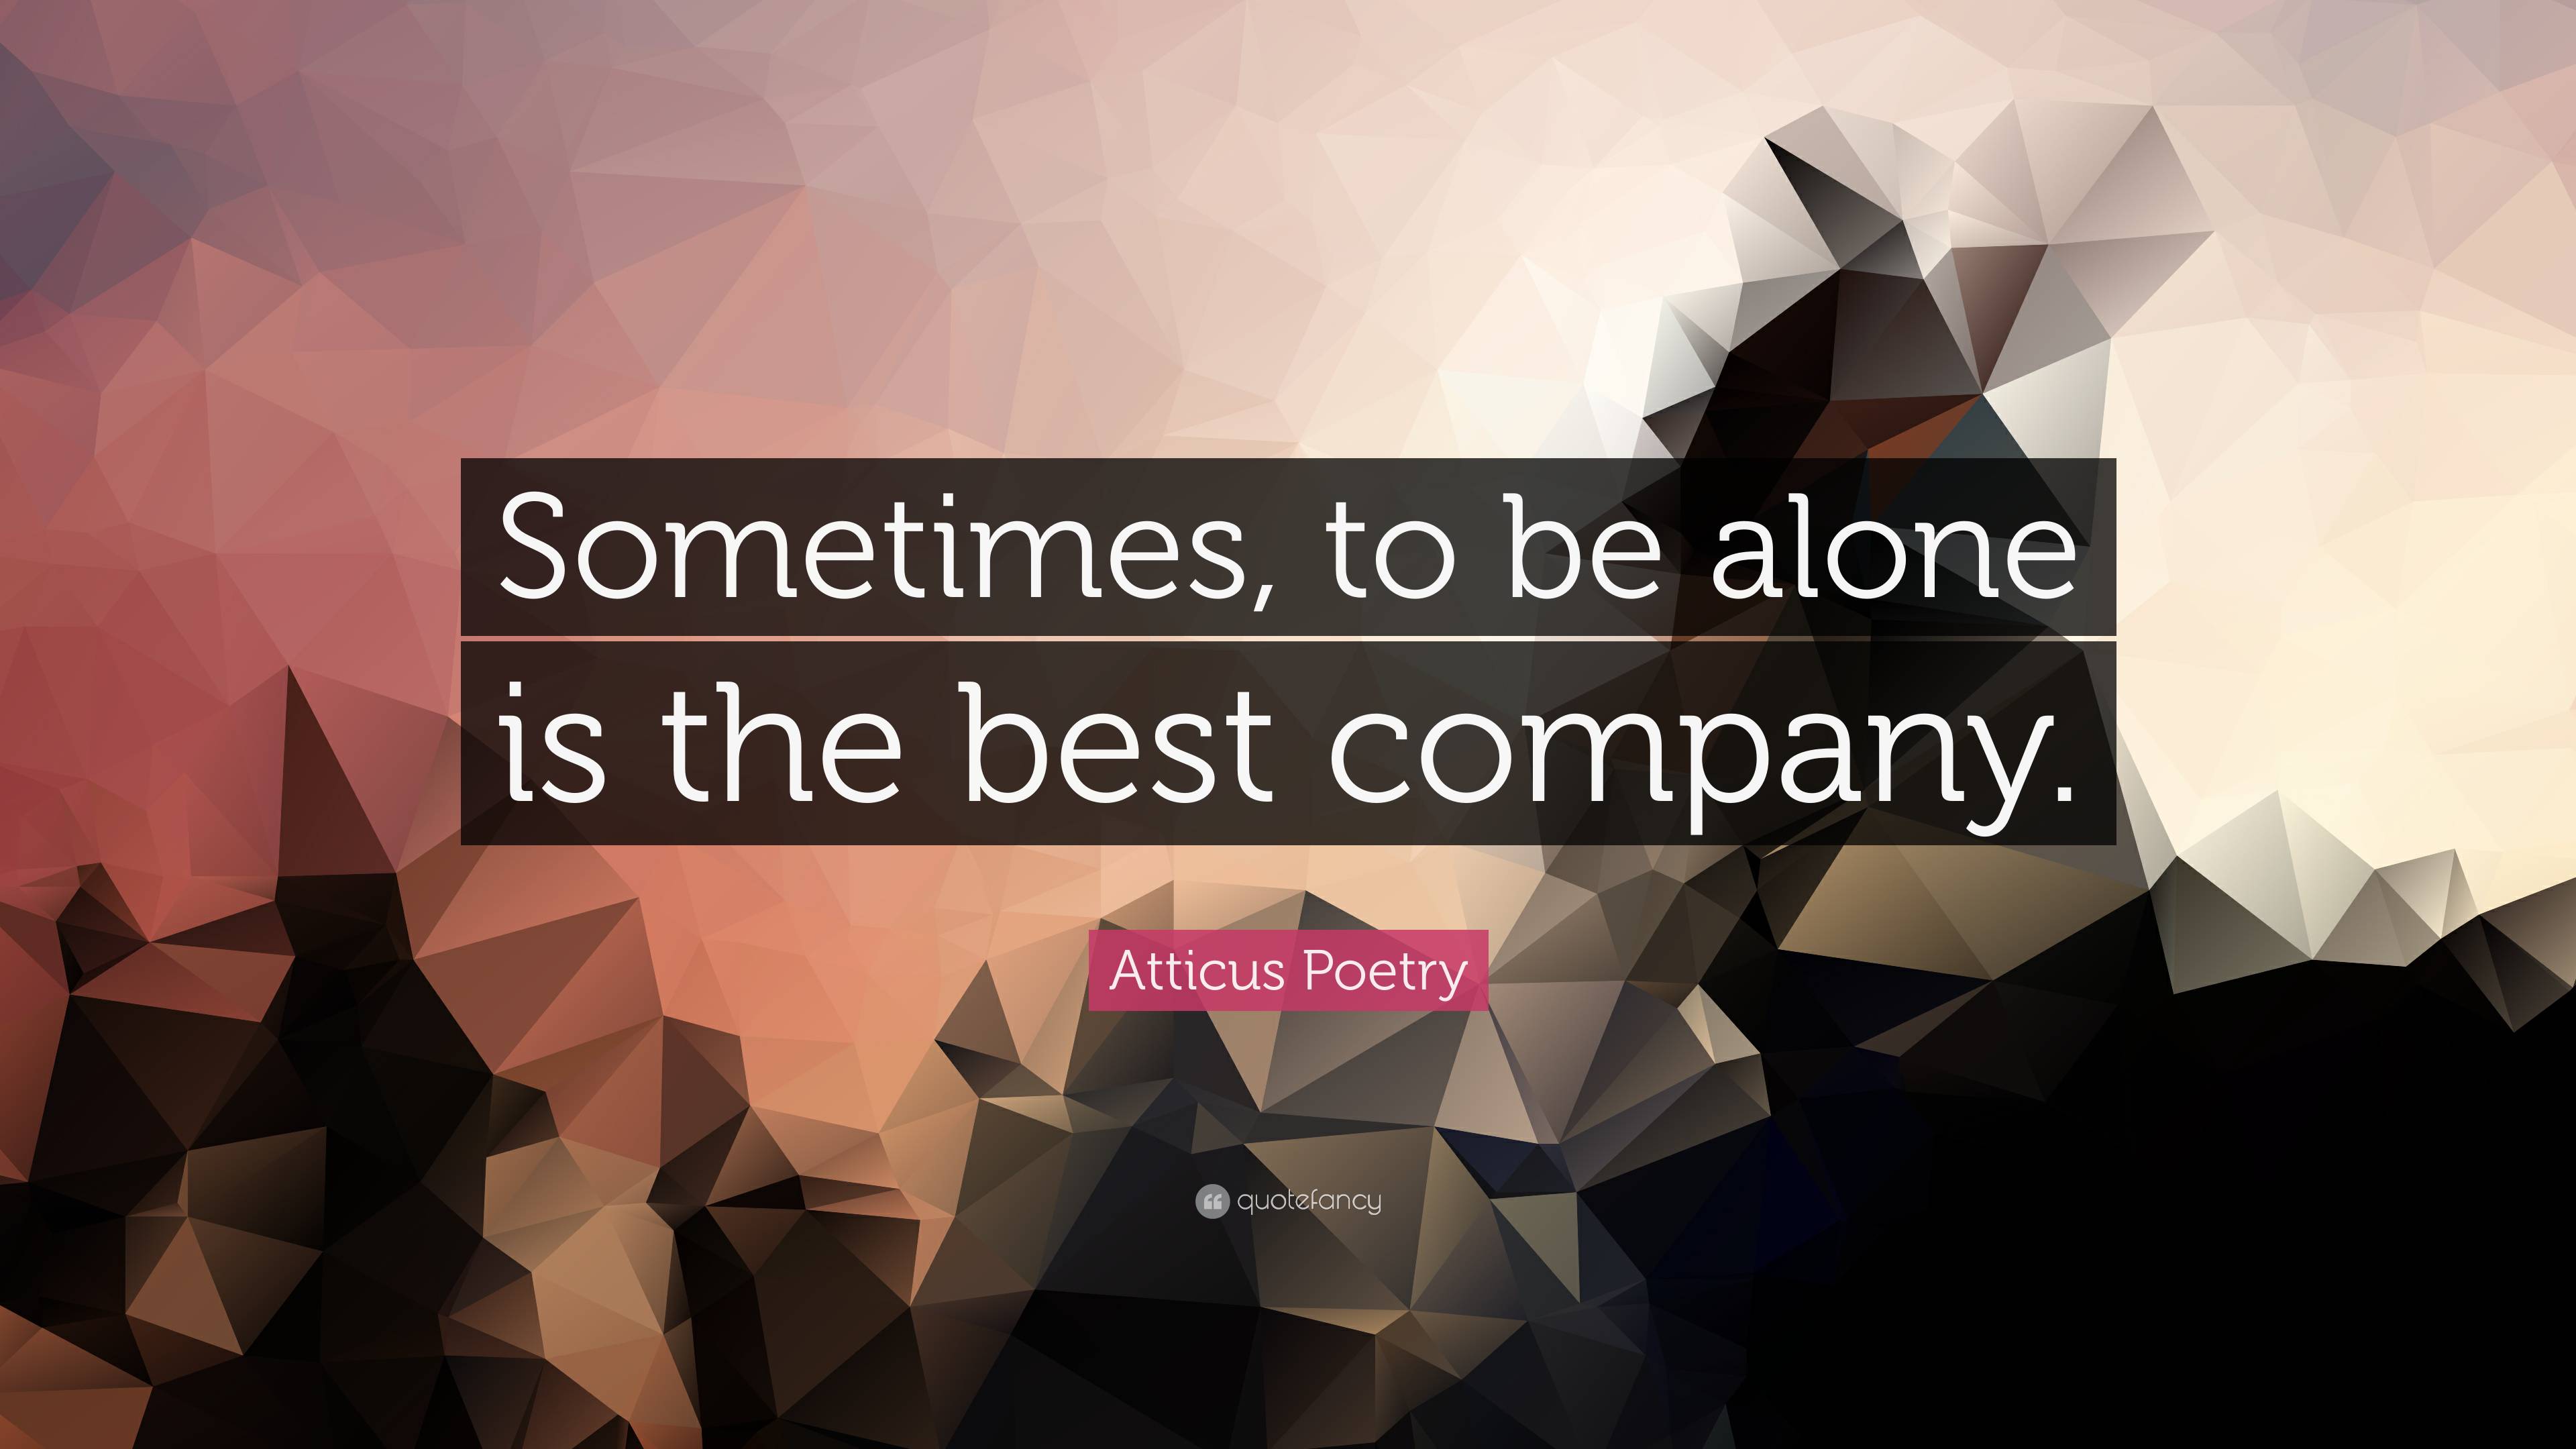 Atticus Poetry Quote: “Sometimes, to be alone is the best company.”